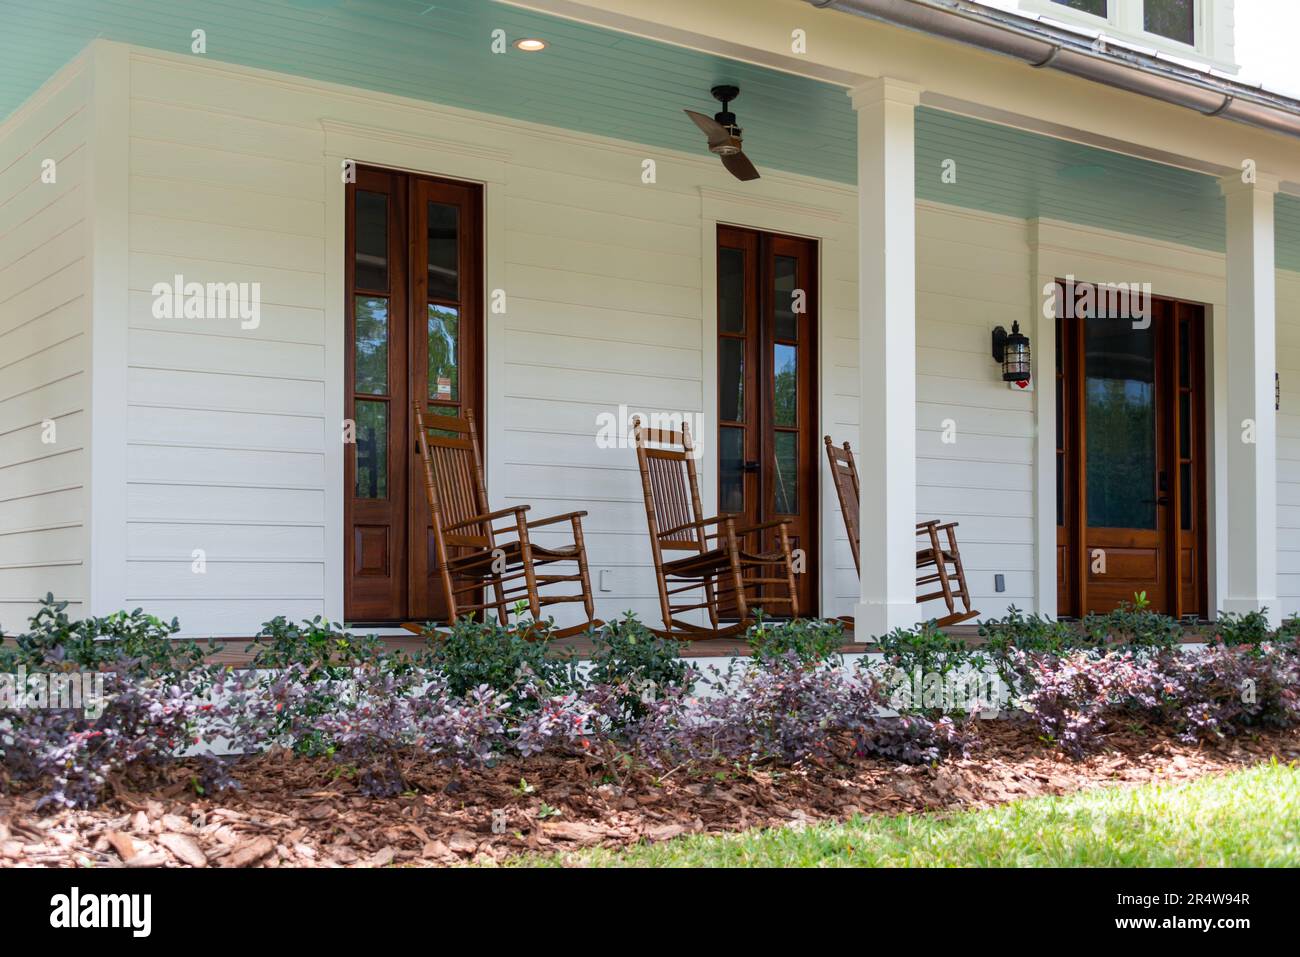 Three vintage brown wooden rocking chairs on the veranda of an old white colored country house with a wrap around porch. There's a flower bed. Stock Photo